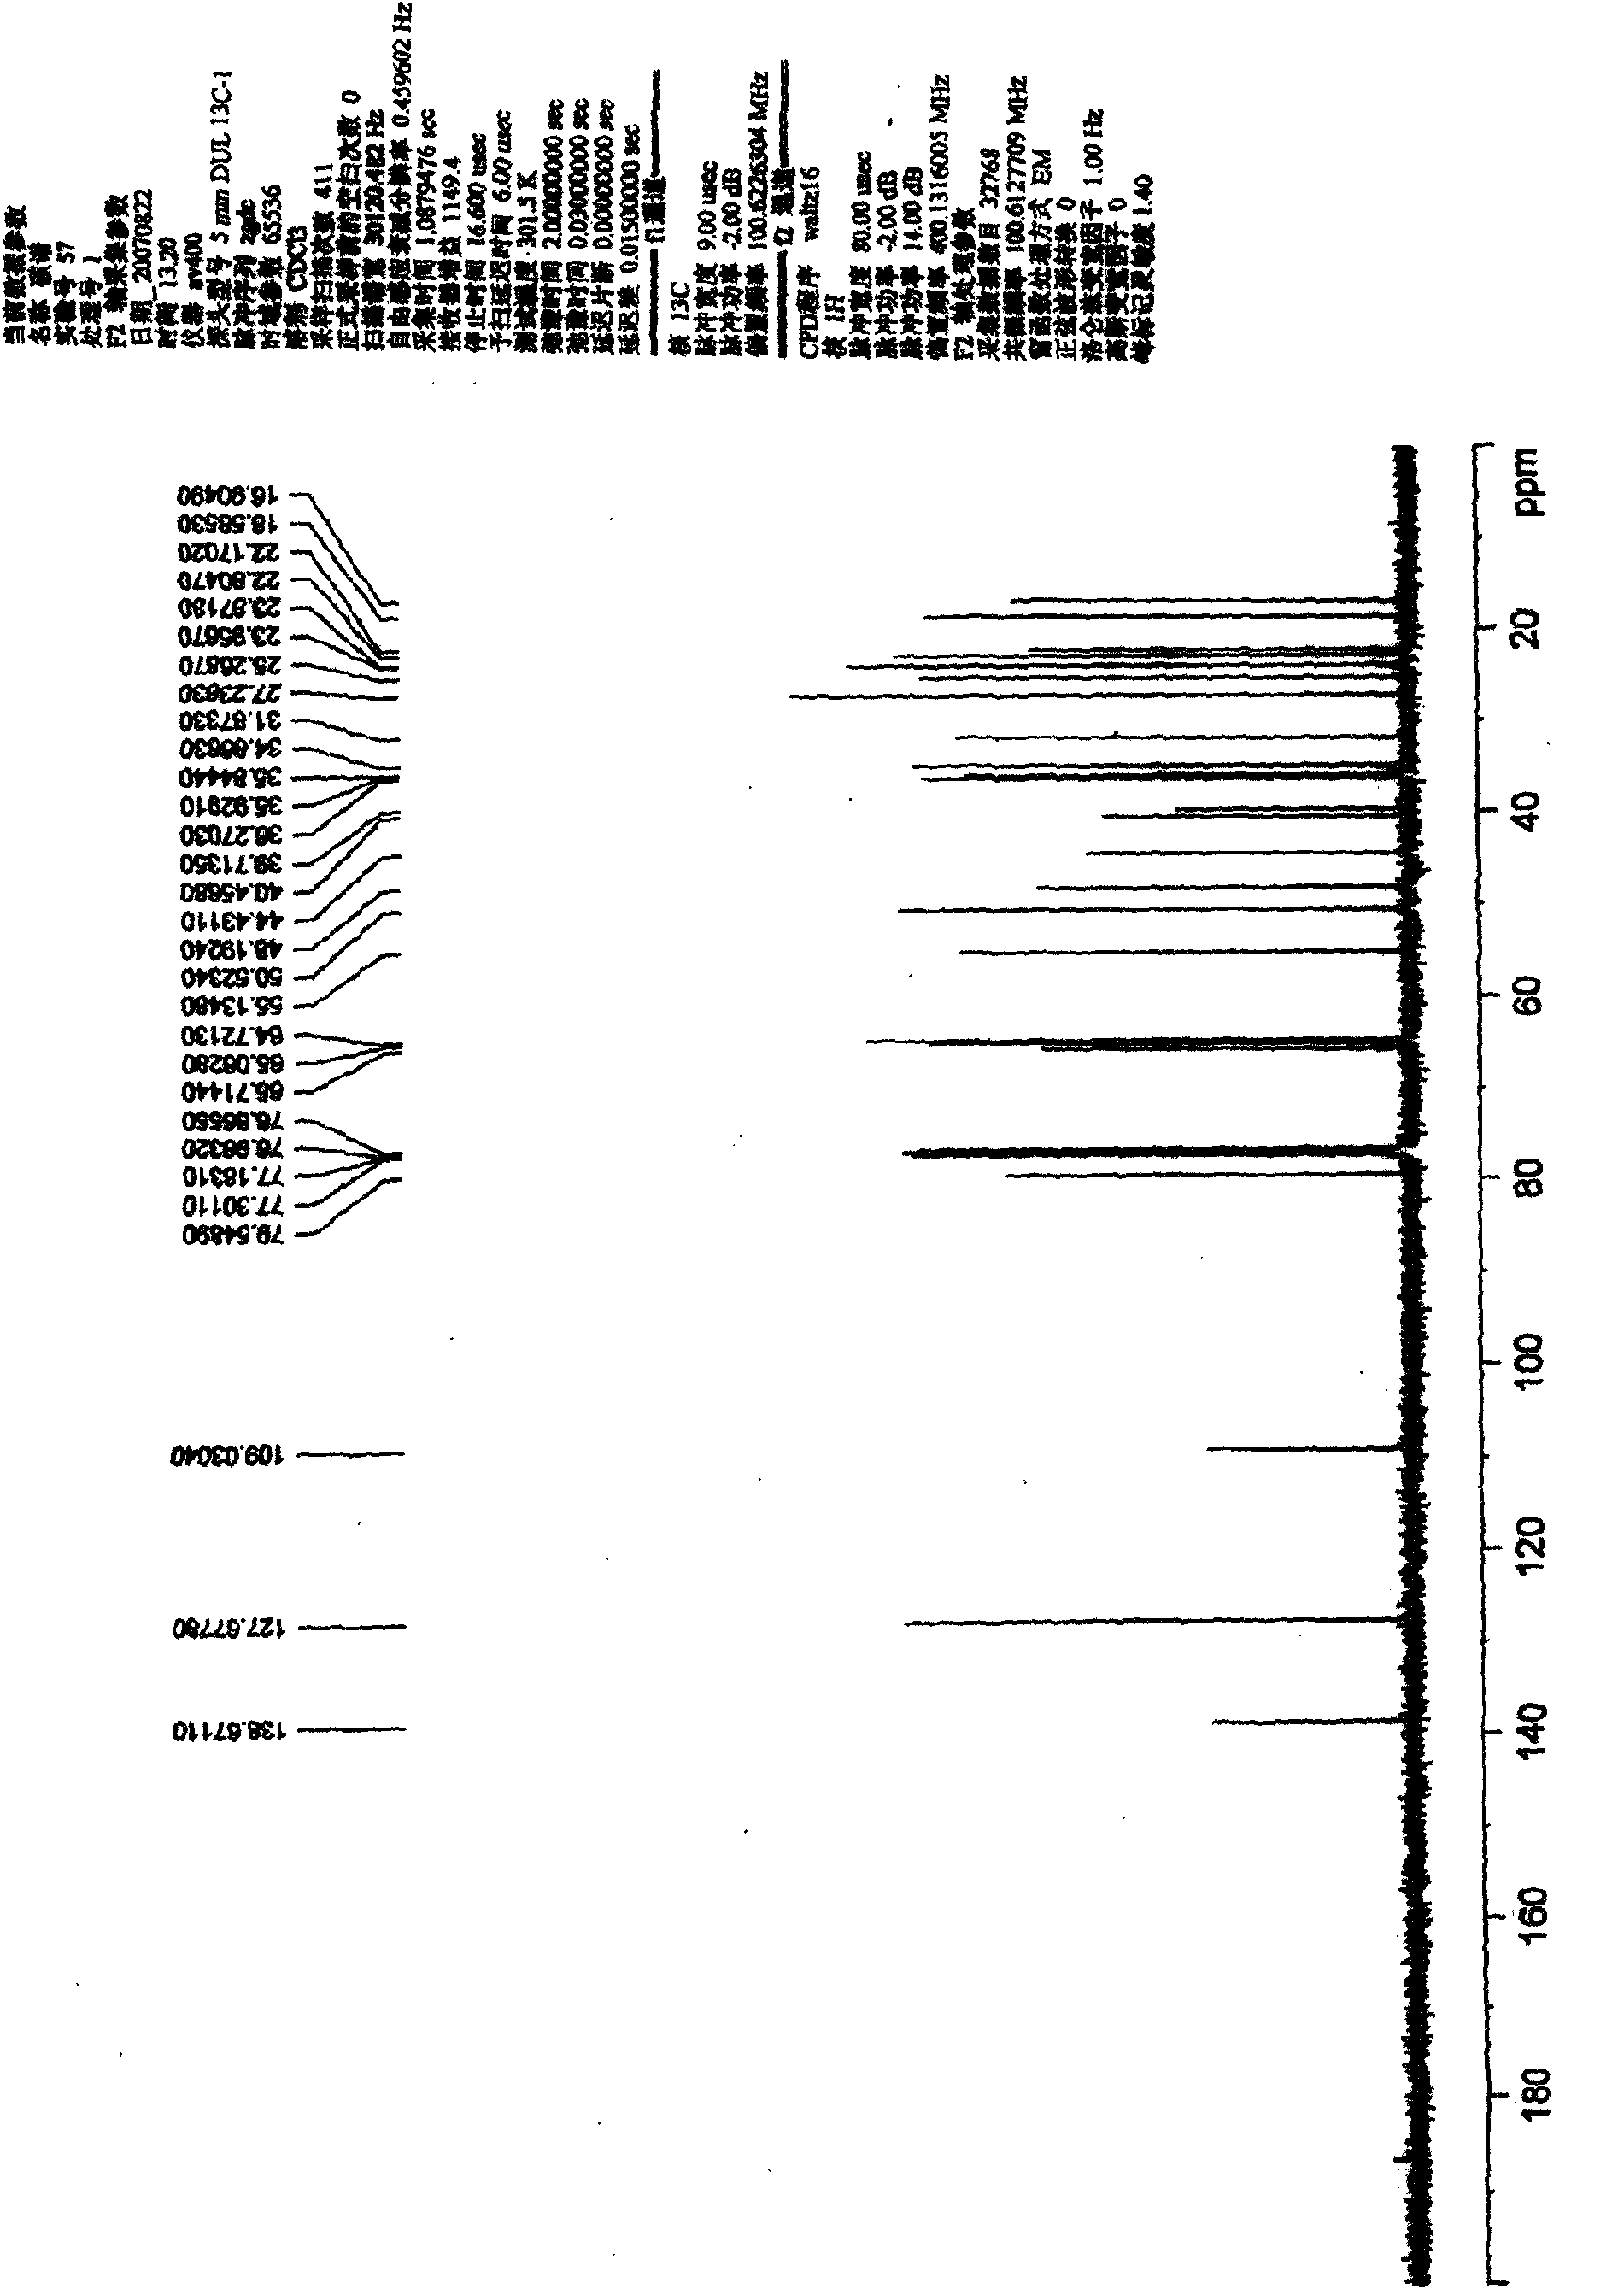 Kirenol derivative and application thereof in preparation of proinflammatory cytokine inhibitor